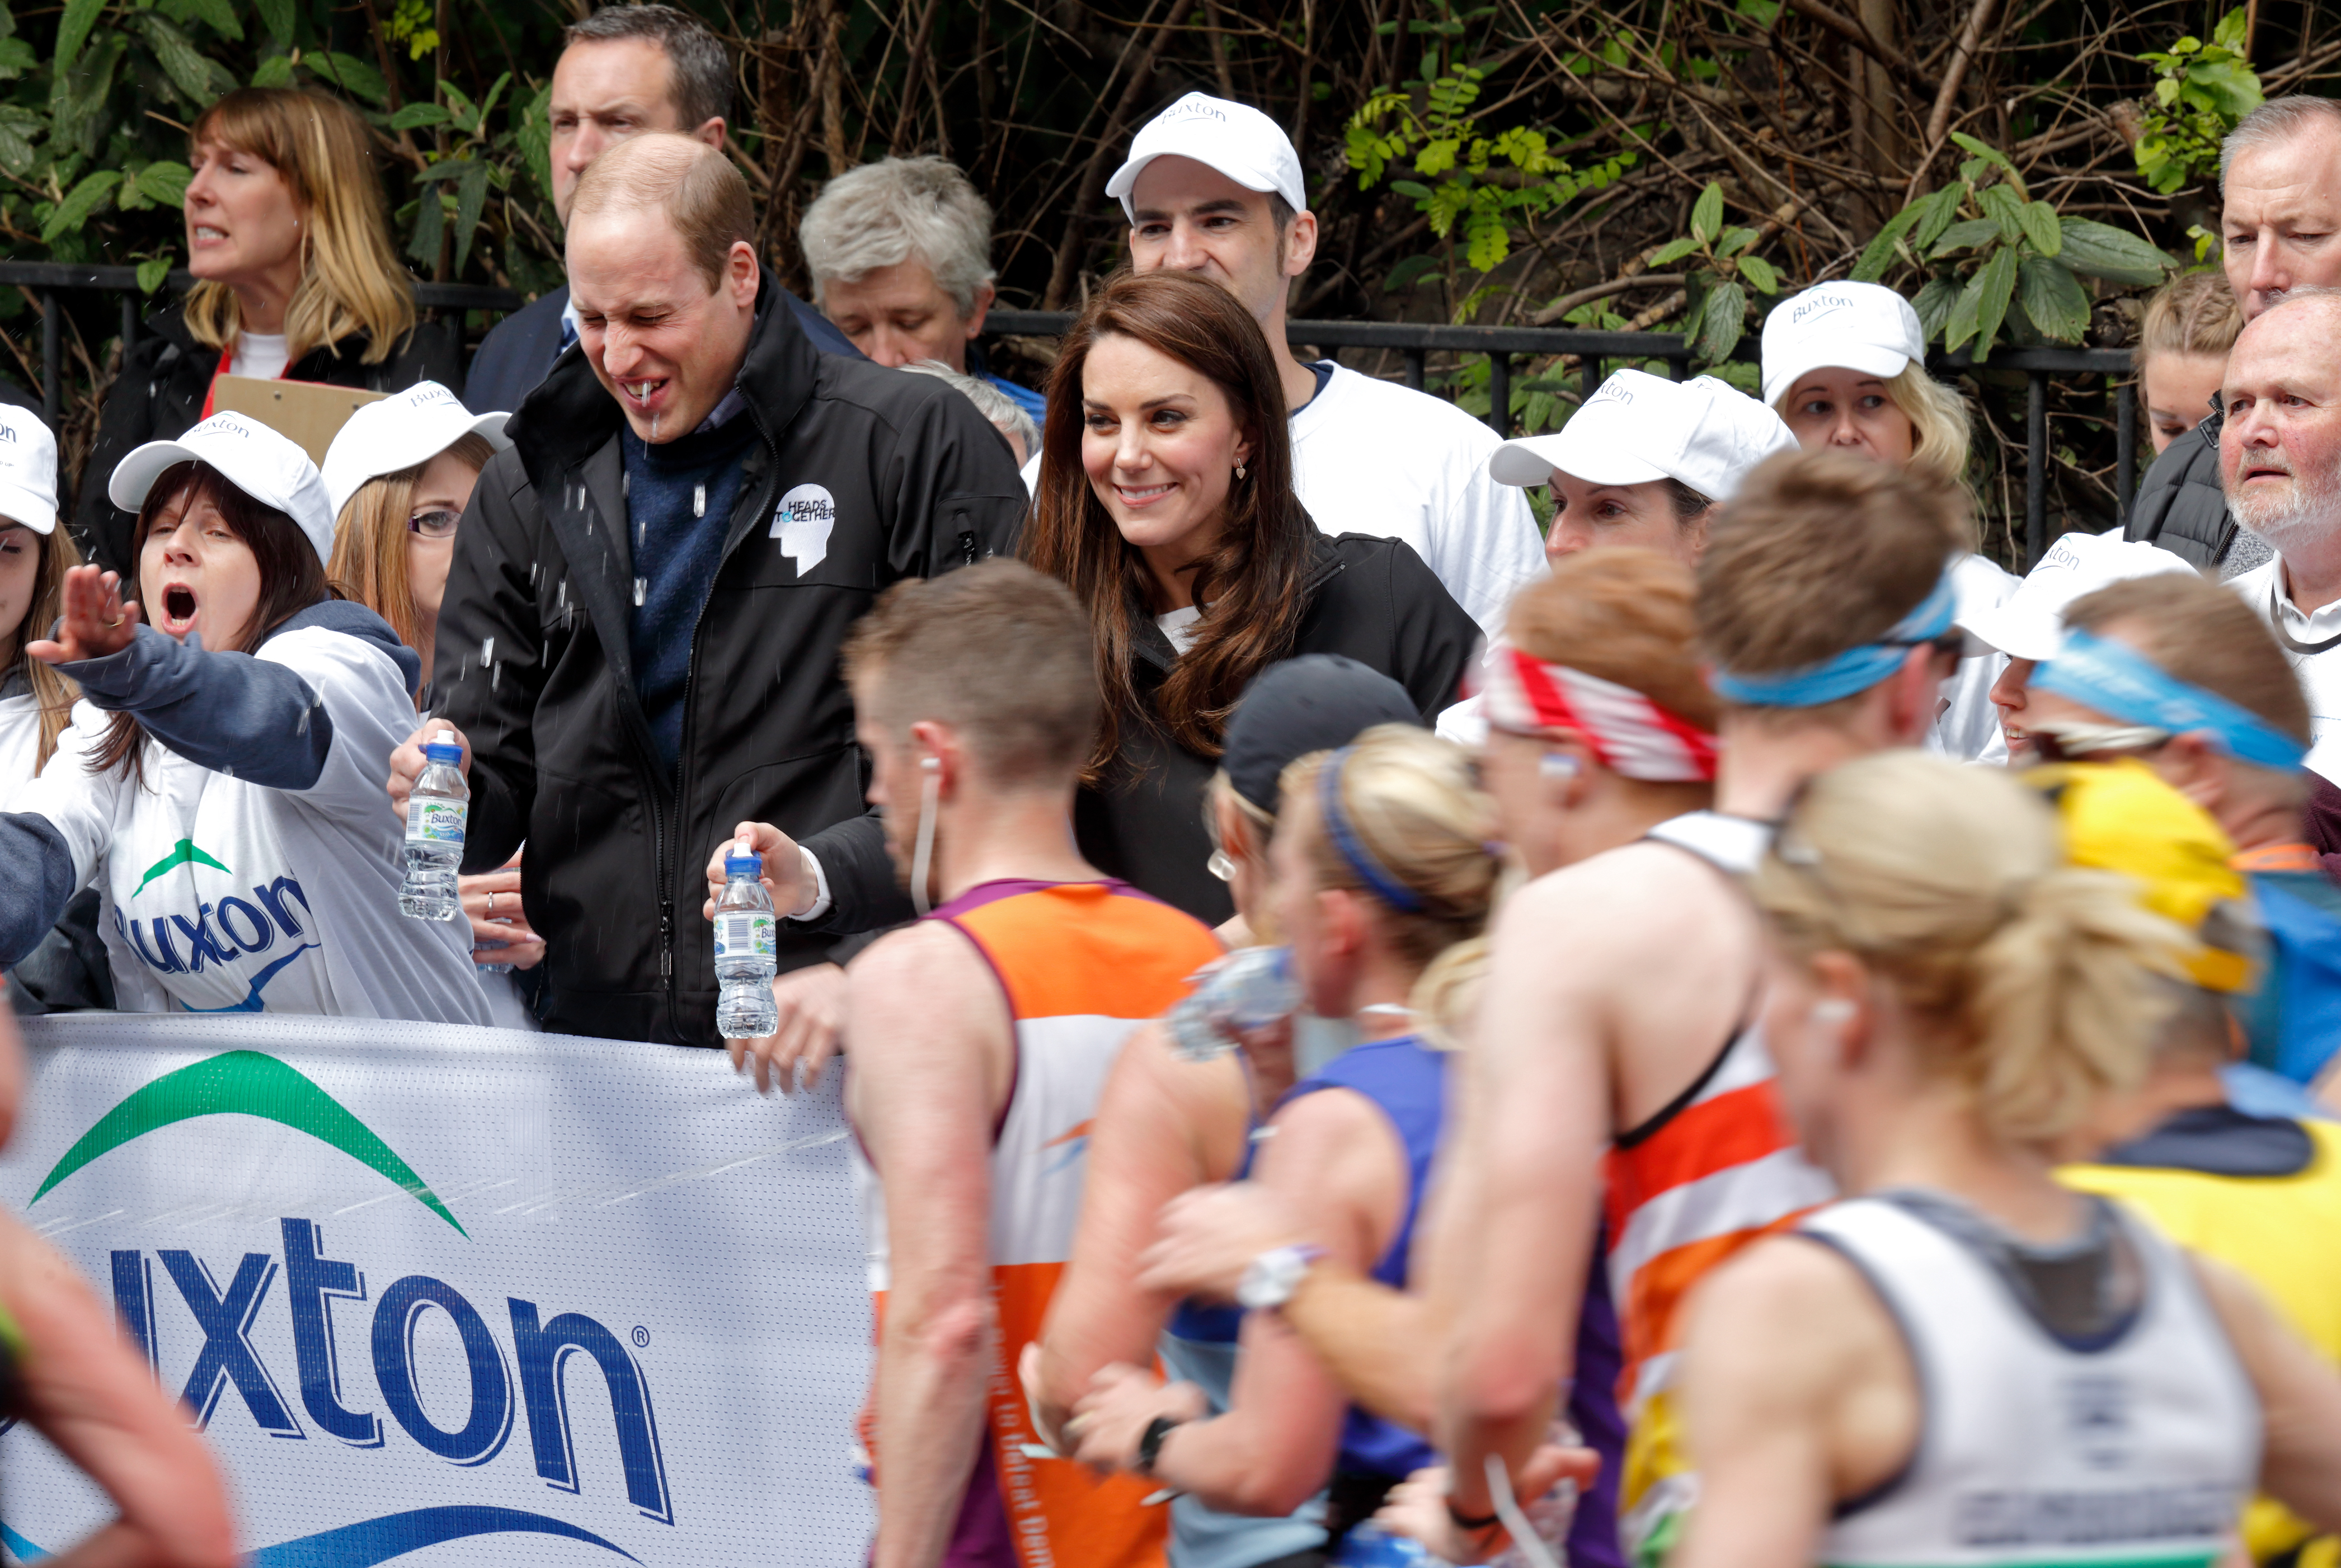 LONDON, UNITED KINGDOM - APRIL 23: (EMBARGOED FOR PUBLICATION IN UK NEWSPAPERS UNTIL 48 HOURS AFTER CREATE DATE AND TIME) Prince William, Duke of Cambridge is squirted with water as he &amp; Catherine, Duchess of Cambridge hand out water to runners taking part in the 2017 Virgin Money London Marathon on April 23, 2017 in London, England. The Heads Together mental heath campaign, spearheaded by The Duke &amp; Duchess of Cambridge and Prince Harry, is the marathon's 2017 Charity of the Year. (Photo by Max Mumby/Indigo/Getty Images) (Max Mumby—Getty Images)